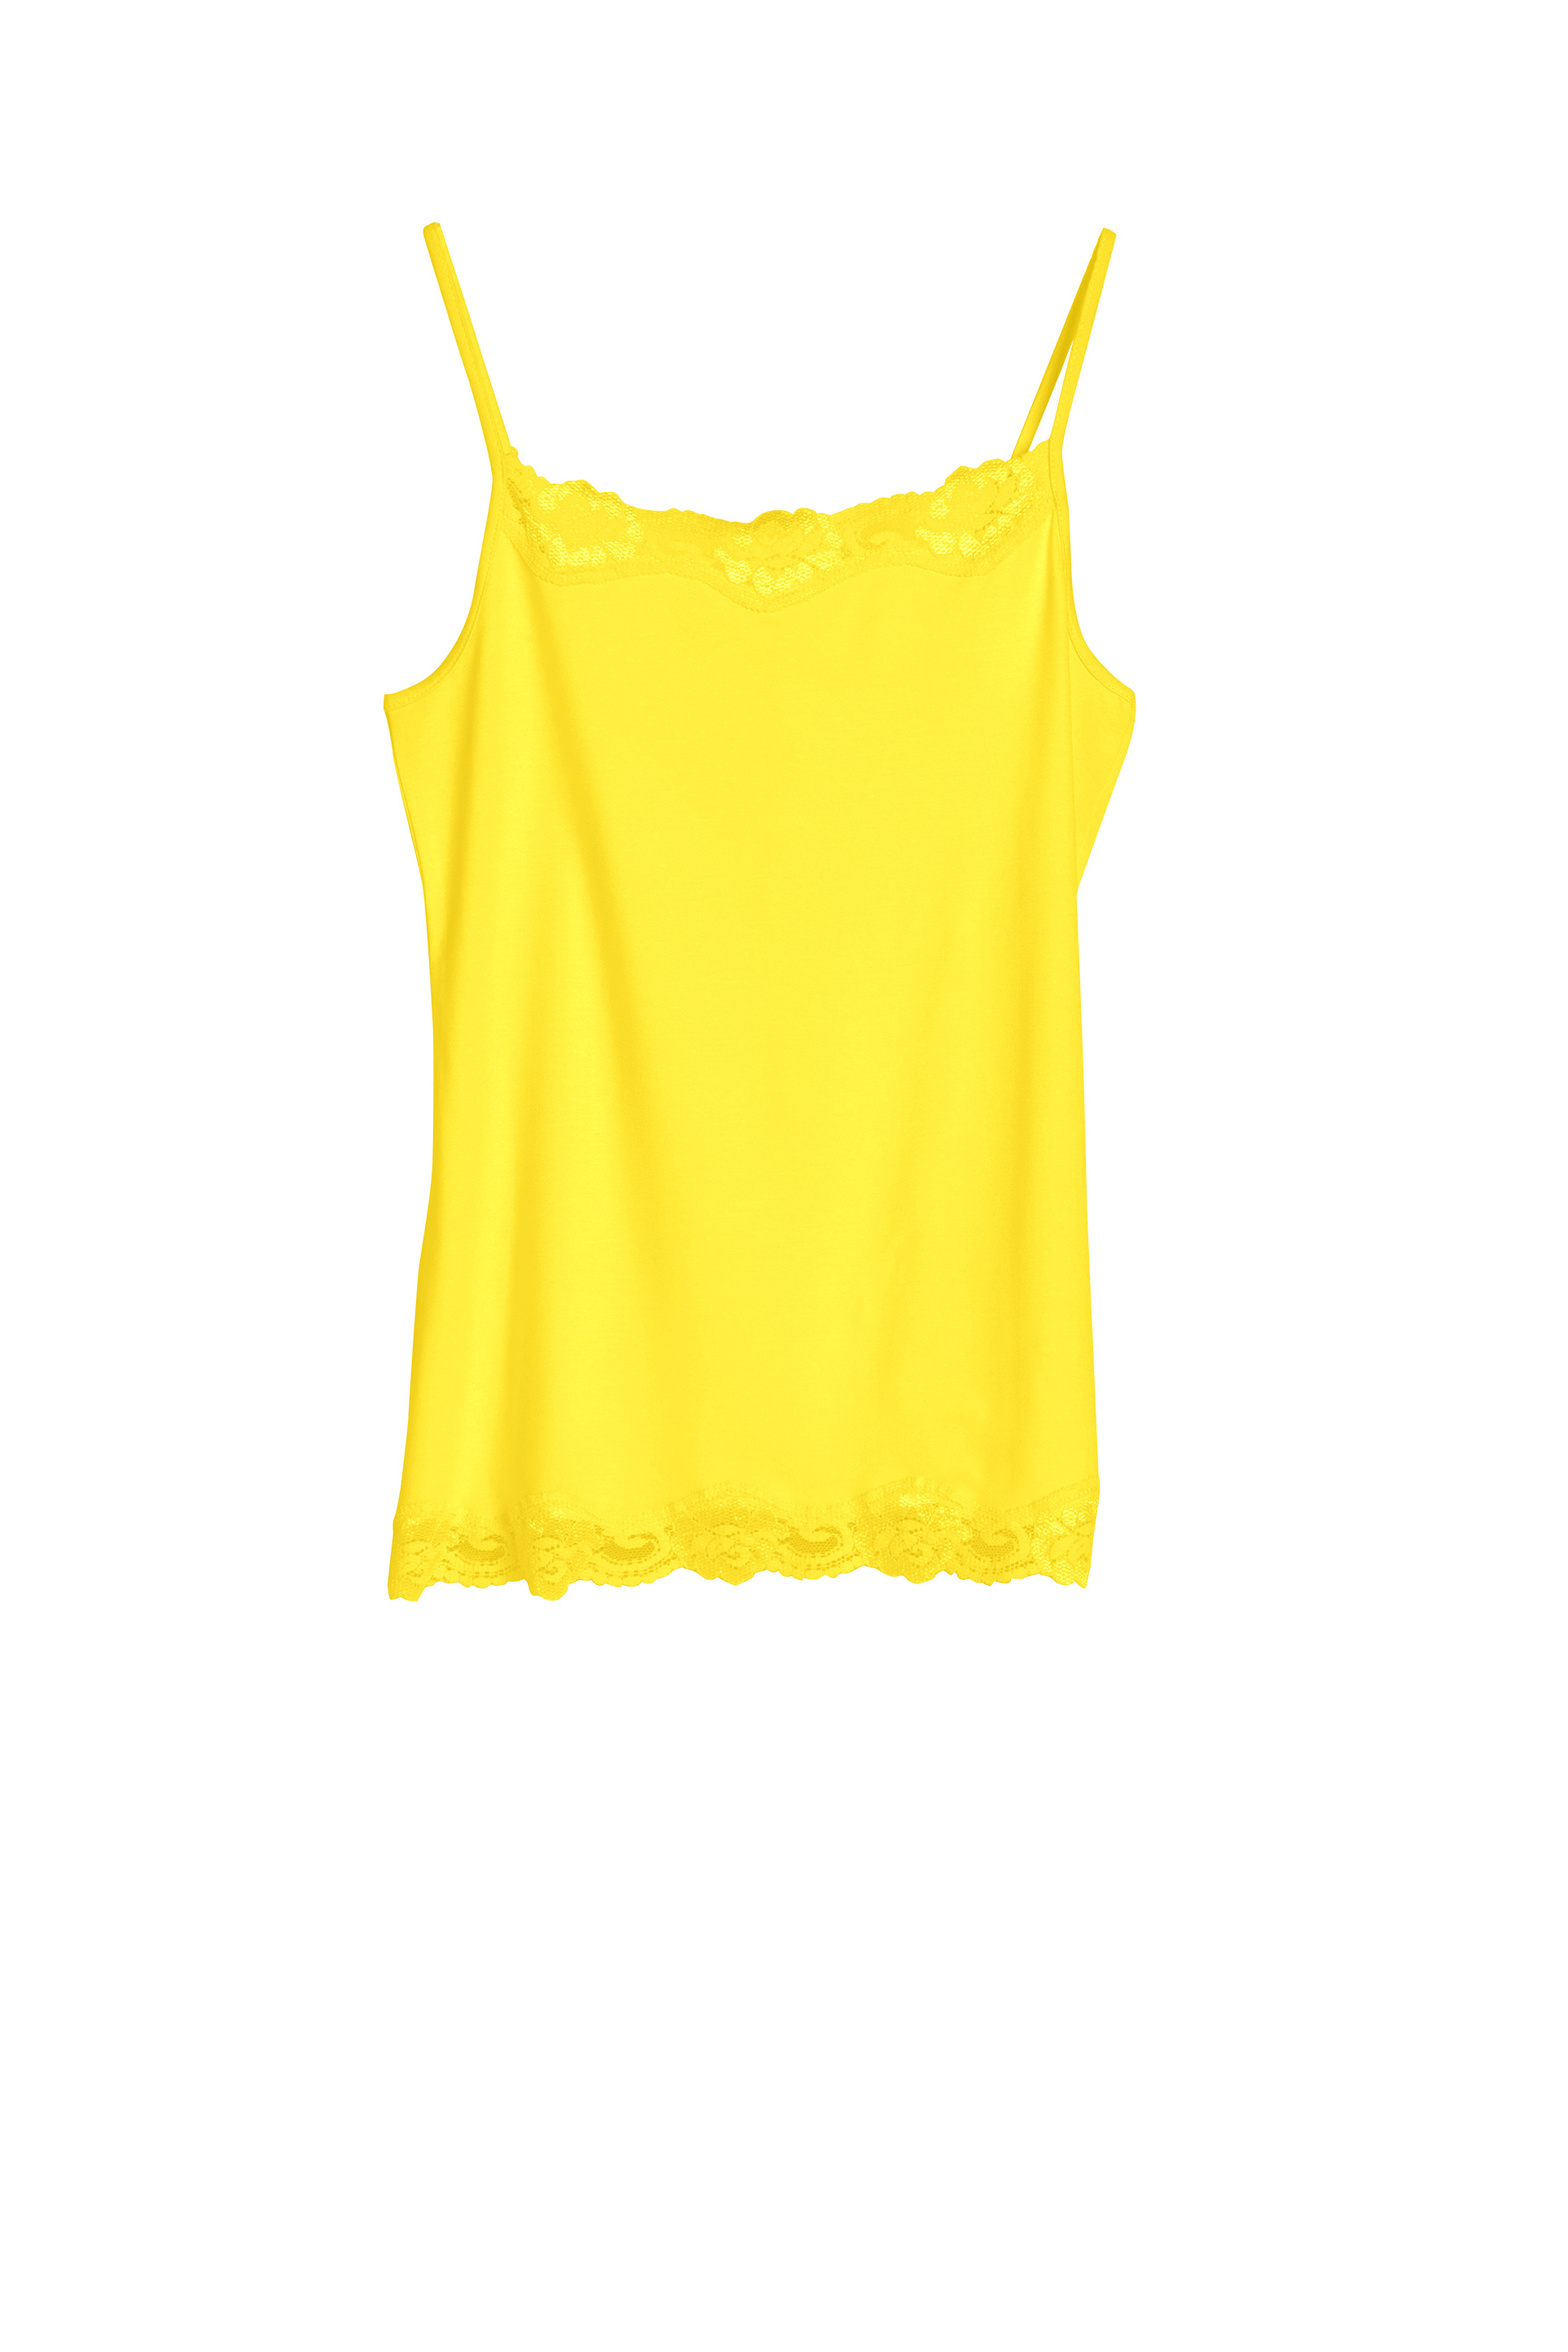 Lace camisole in Dazzle Yellow